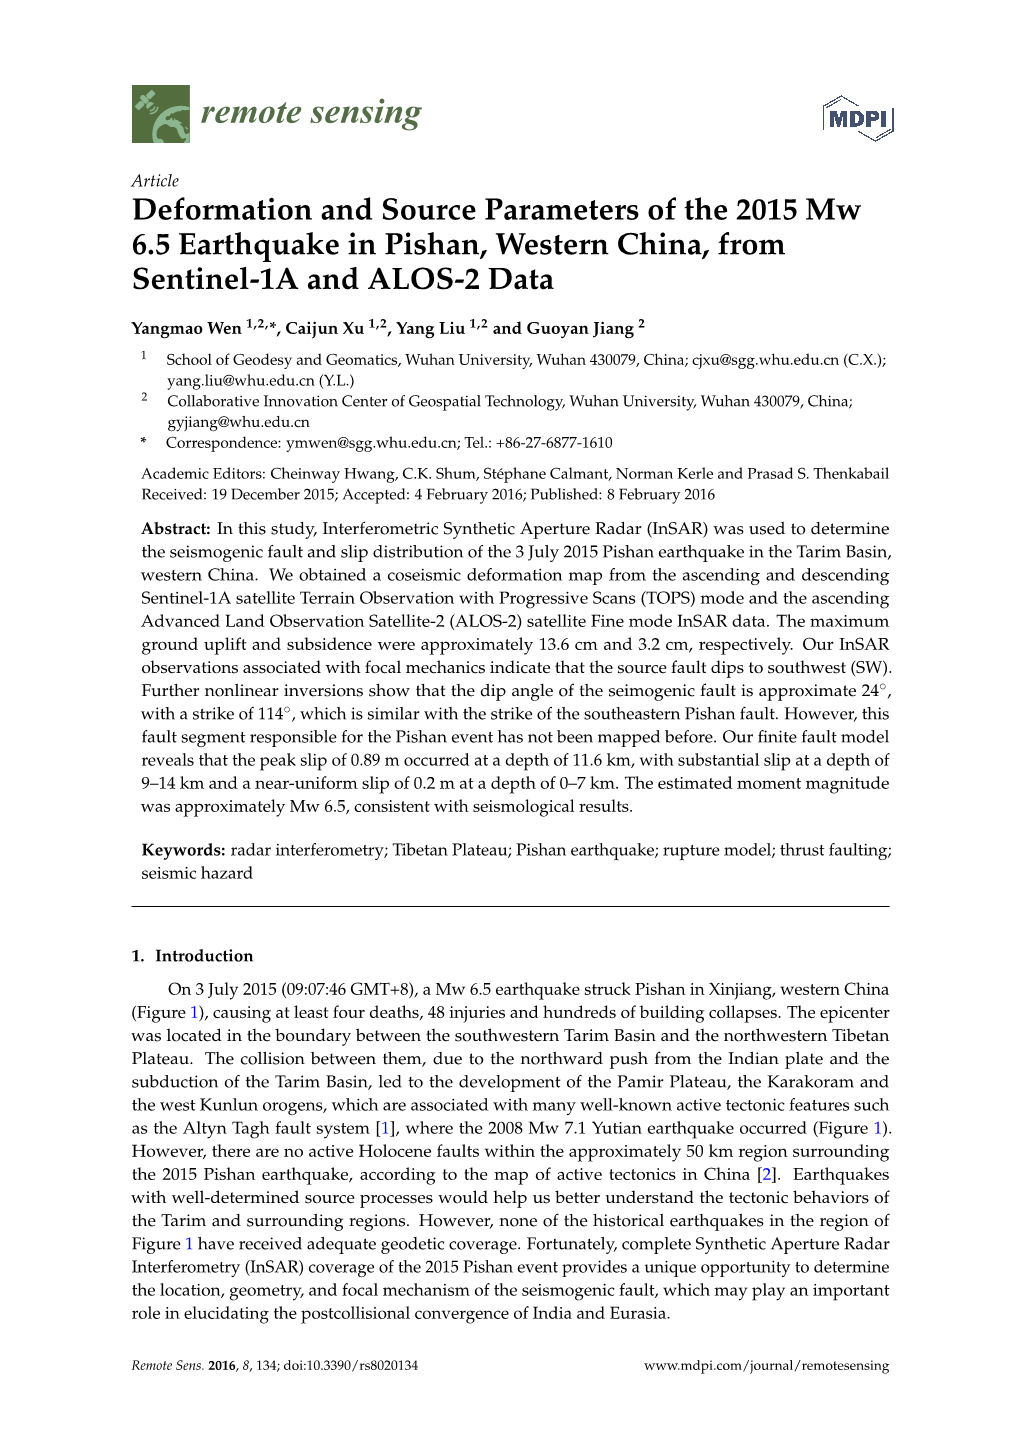 Deformation and Source Parameters of the 2015 Mw 6.5 Earthquake in Pishan, Western China, from Sentinel-1A and ALOS-2 Data